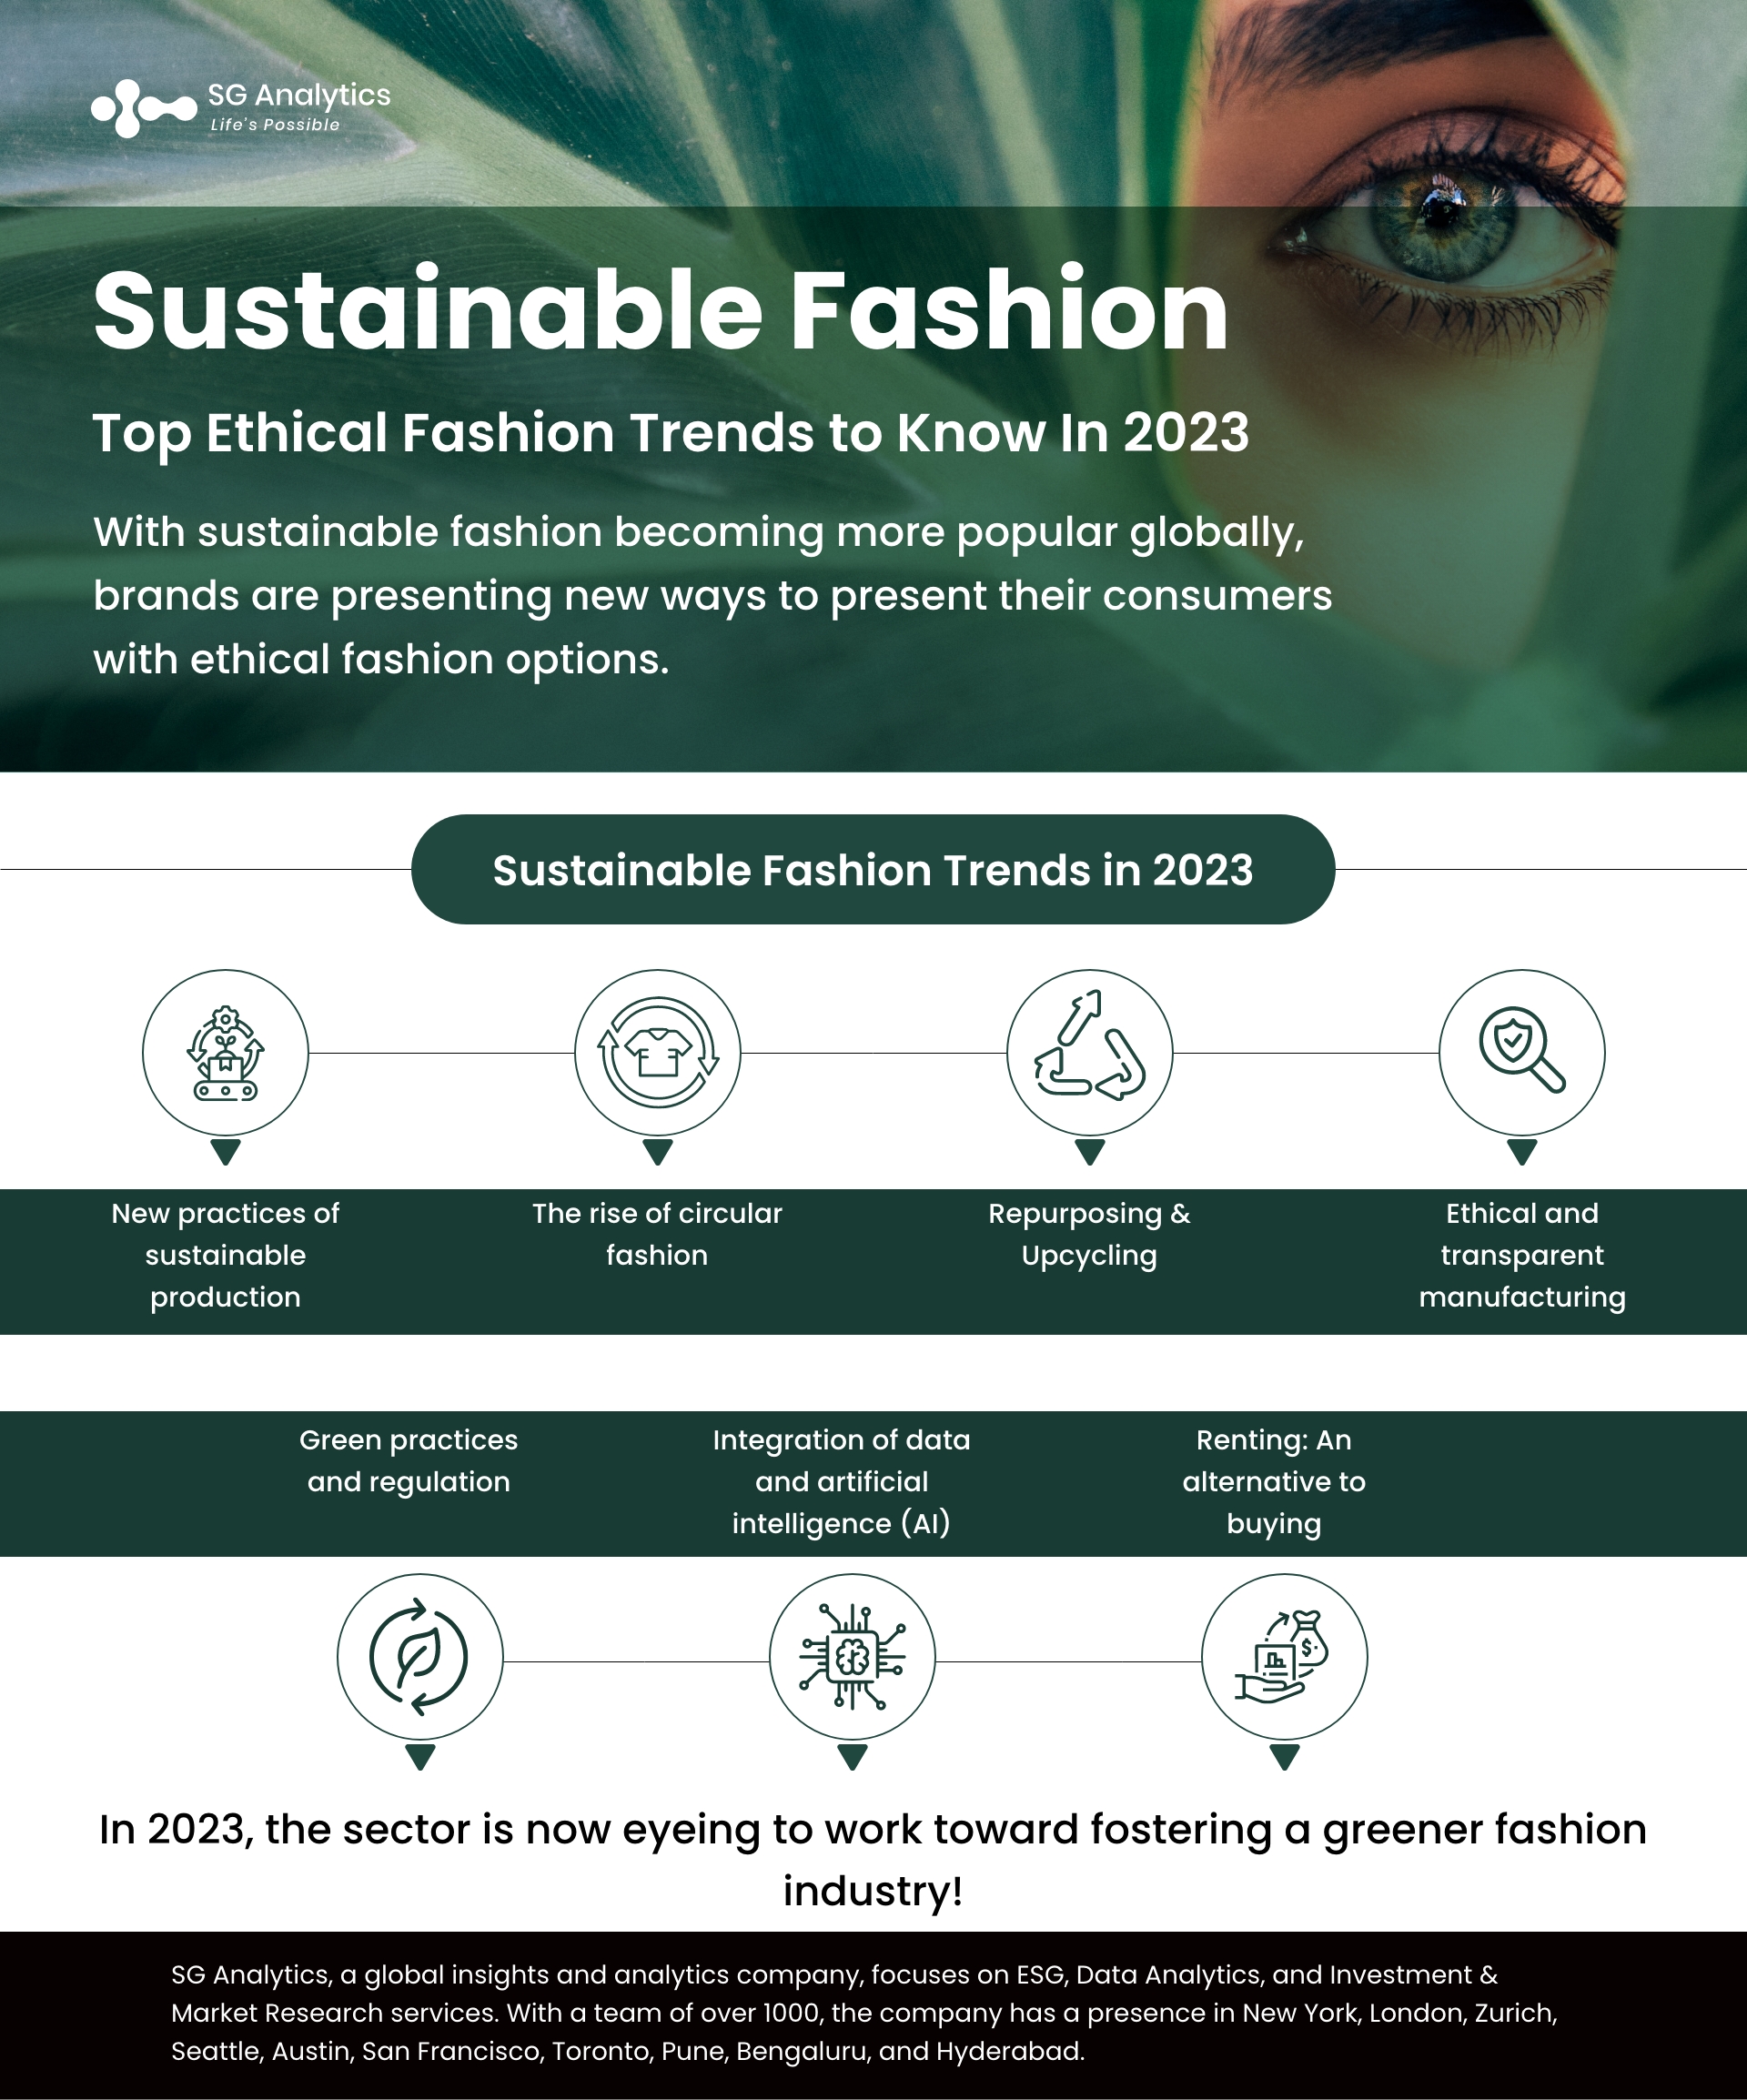 Sustainable Fashion Trends: 7 Ethical Fashion Trends in 2023